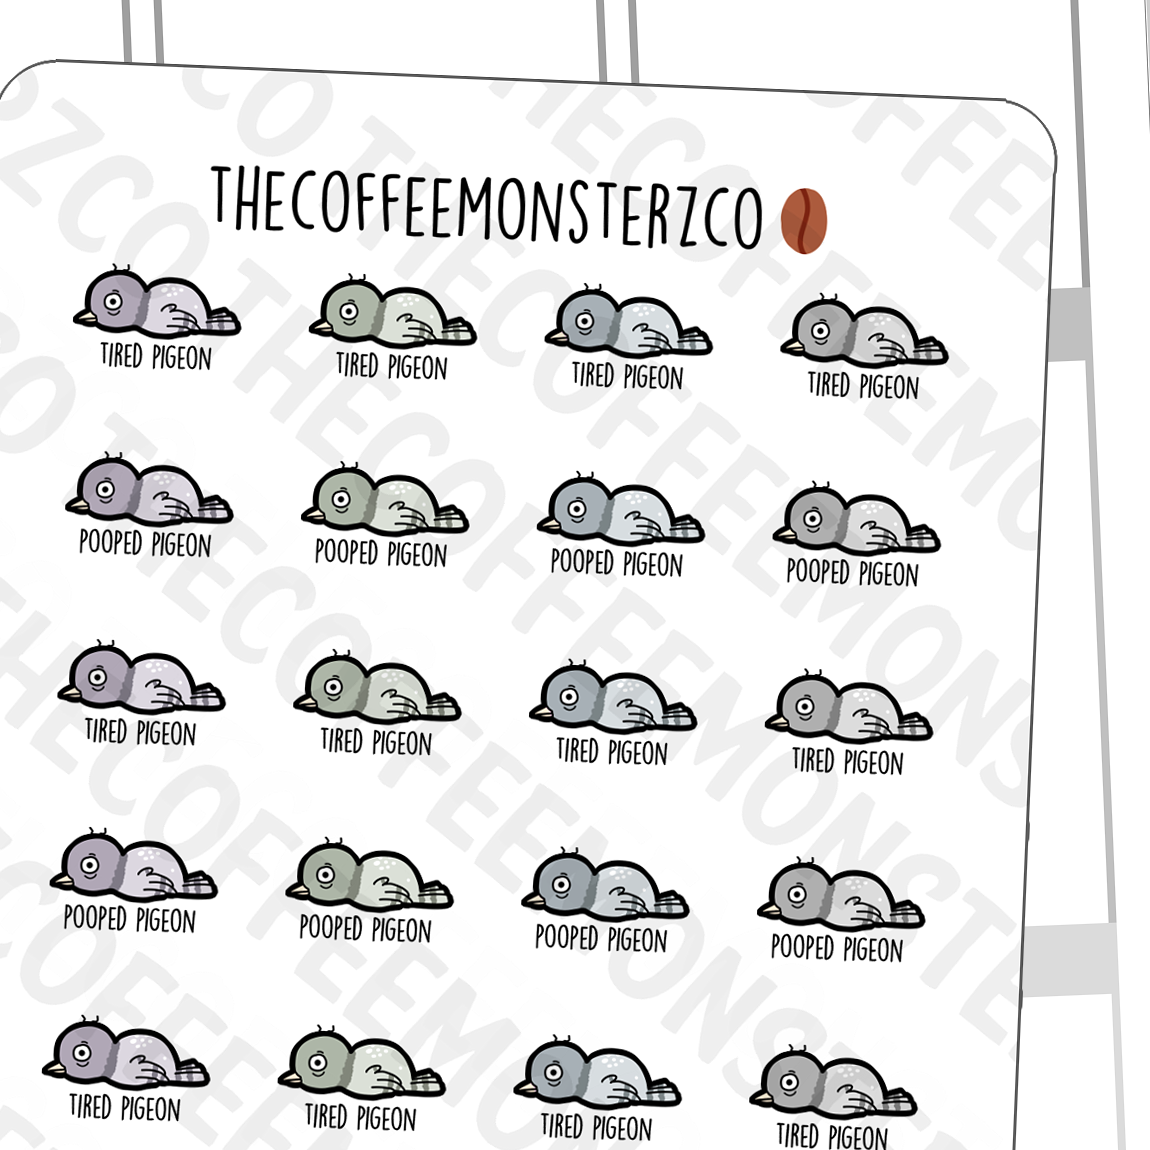 Tired &amp; Pooped Pigeon - TheCoffeeMonsterzCo